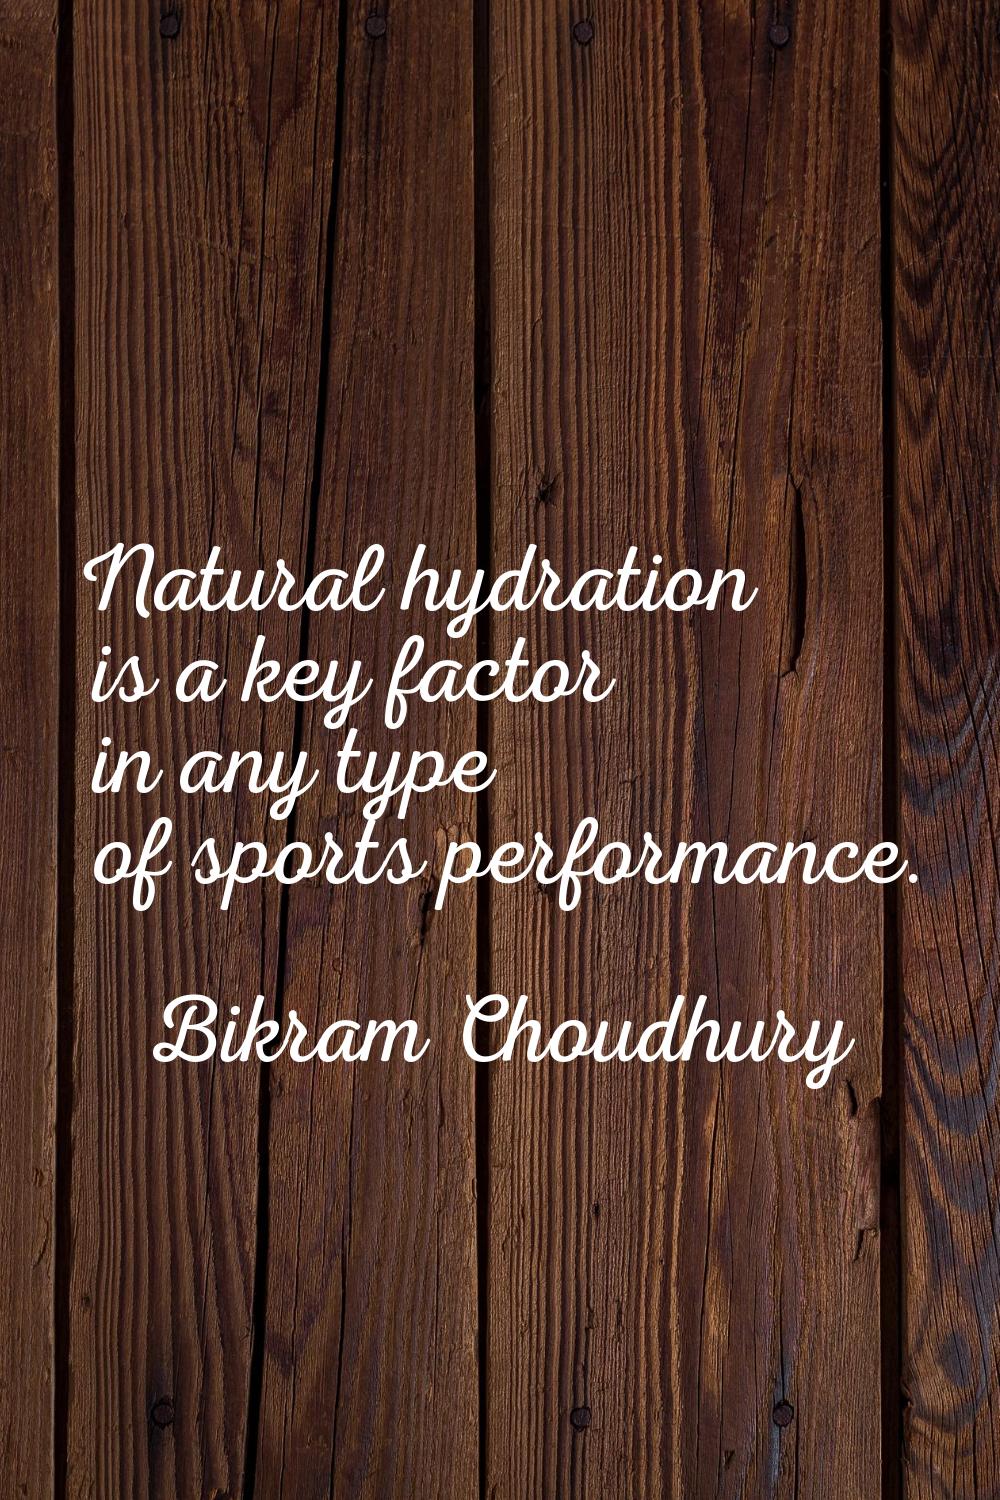 Natural hydration is a key factor in any type of sports performance.